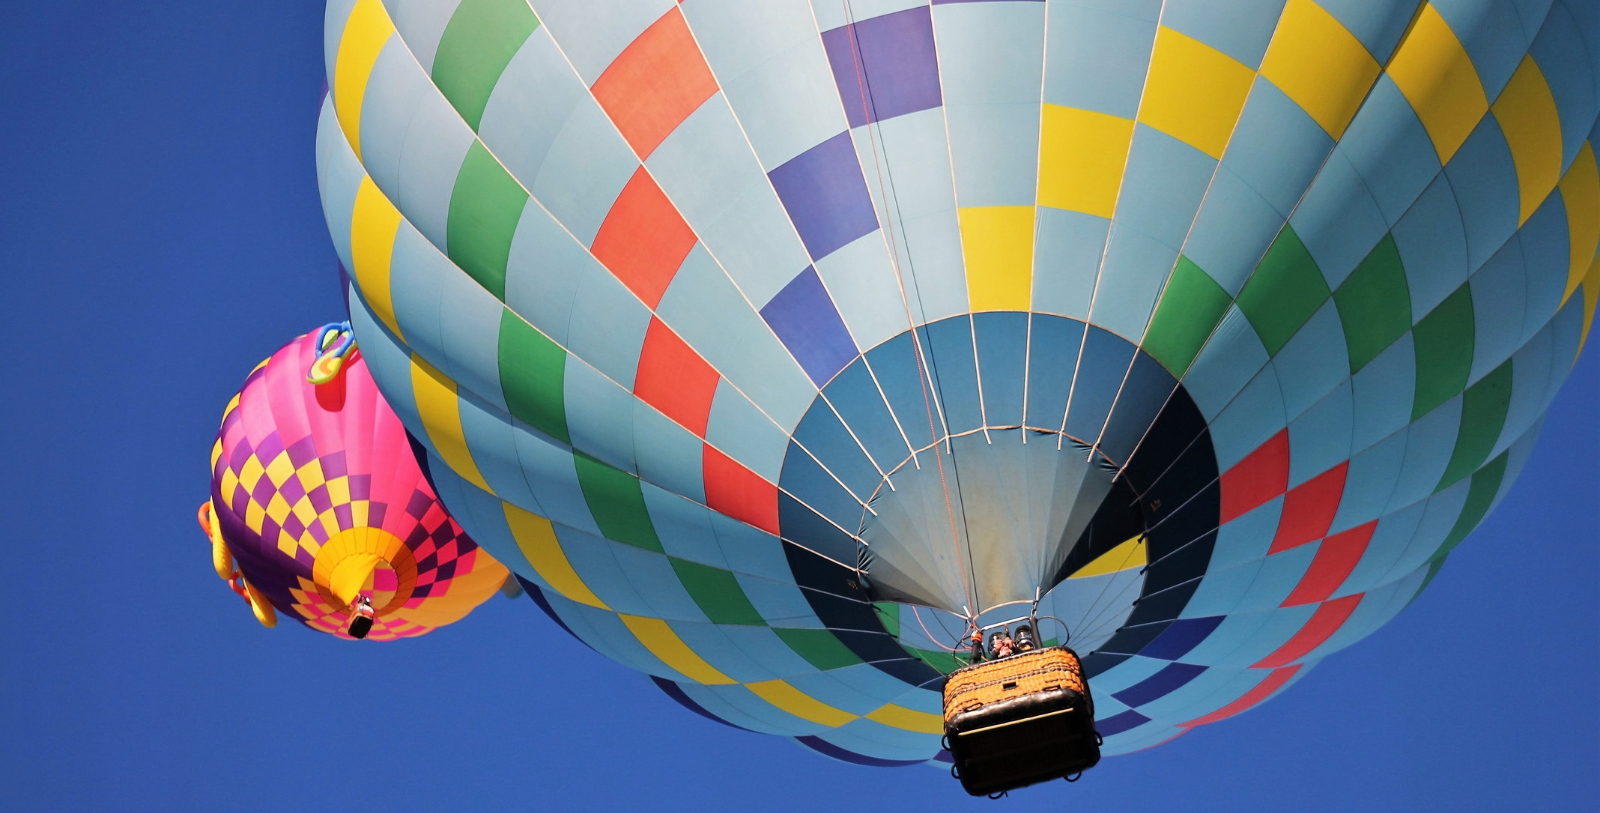 Experience a hot air balloon ride over the countryside of western New Jersey, near the Delaware River.